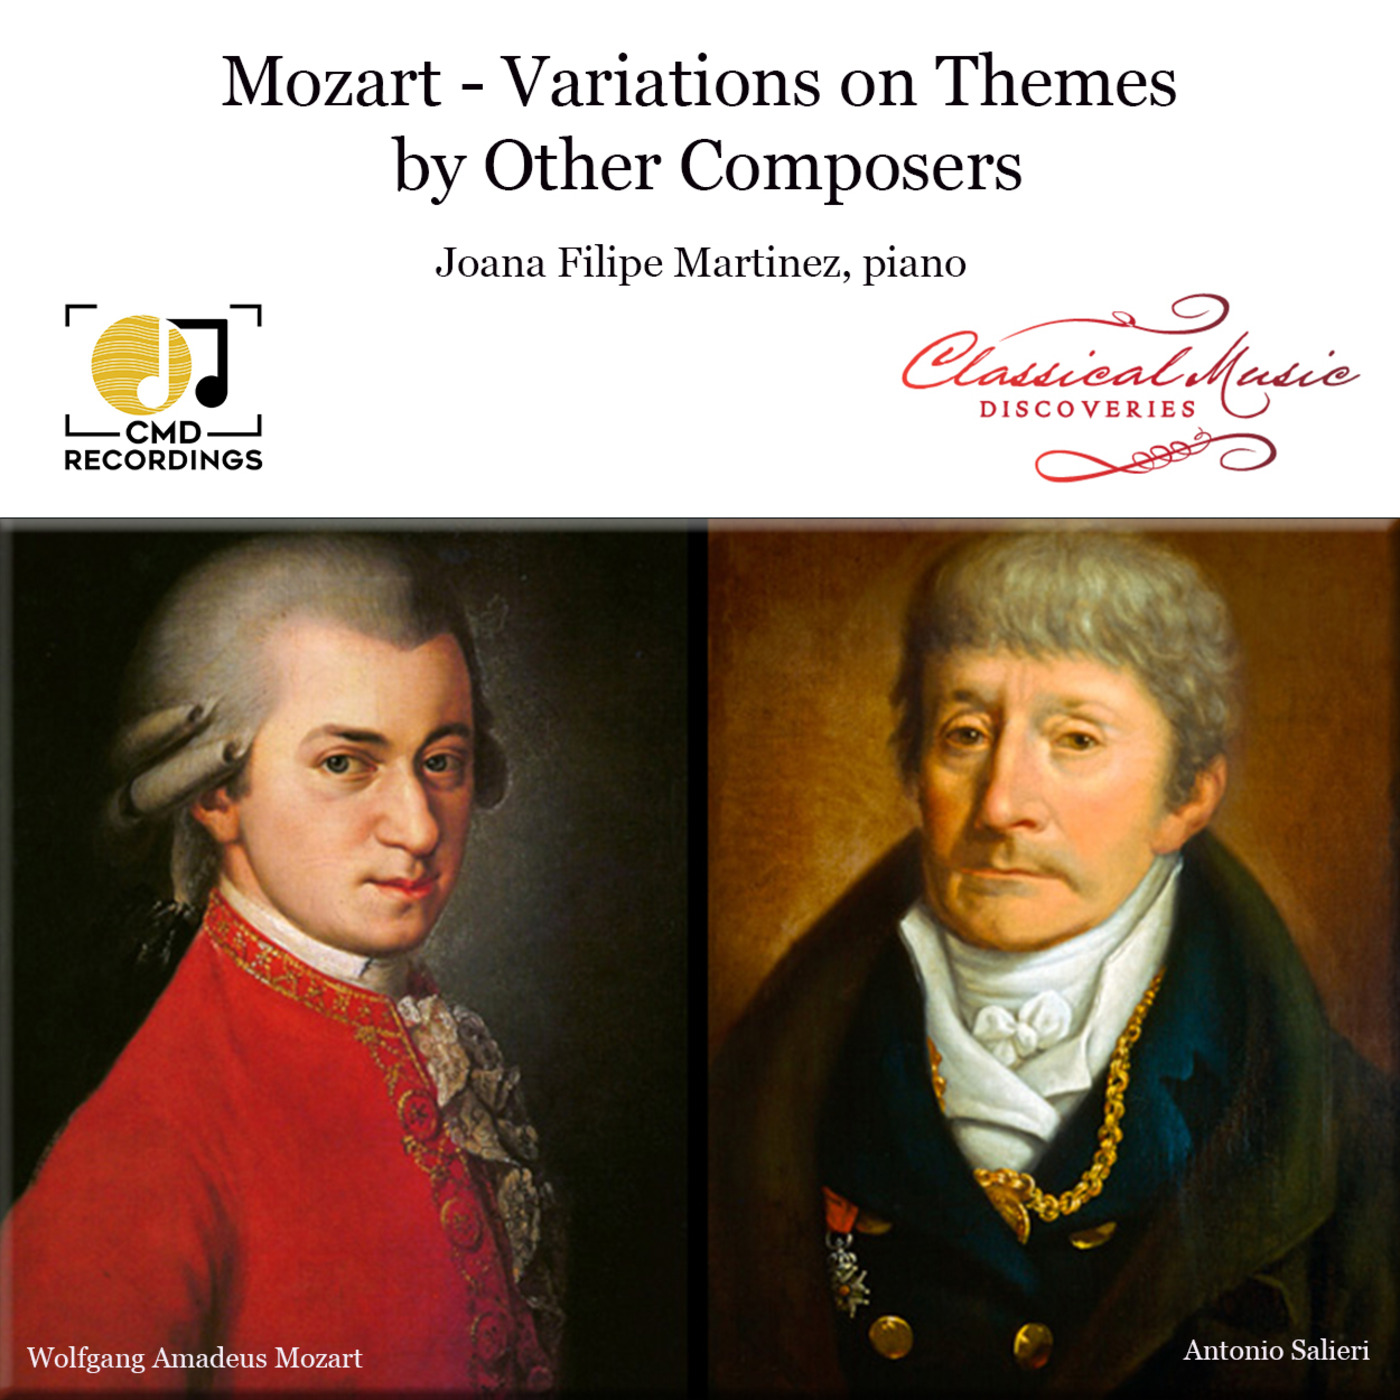 Episode 142: 13142 Mozart - Variations on Themes by Other Composers